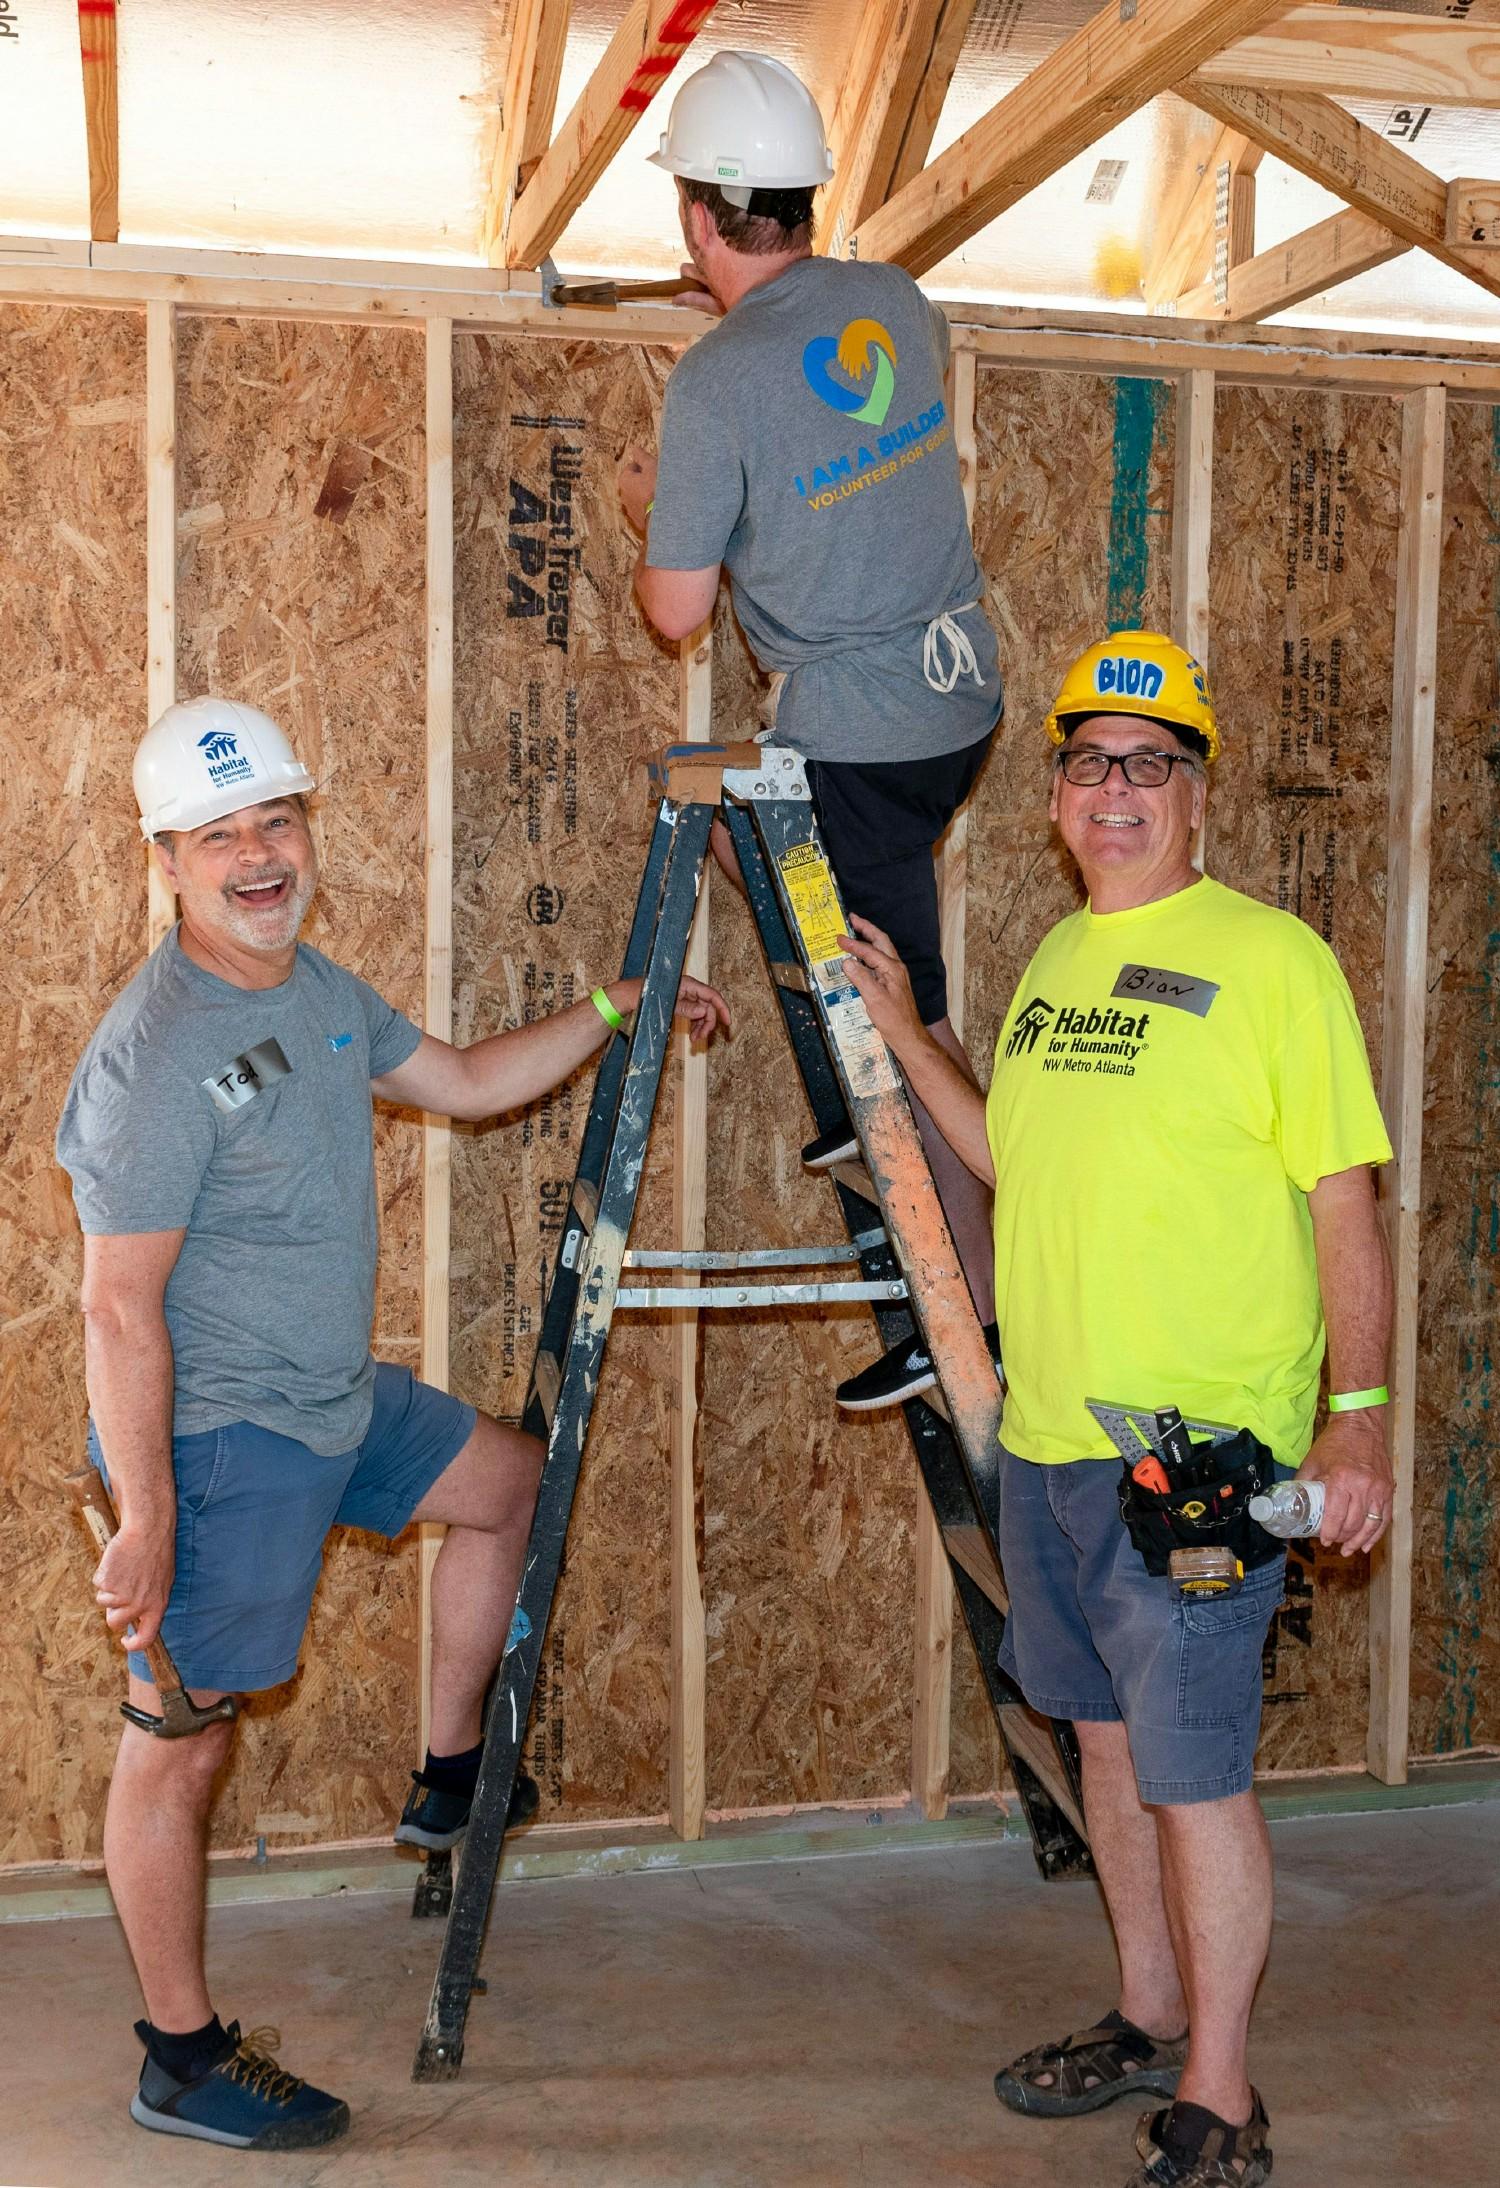 Todd Campbell, Builders Group President and CEO, working hard with the Builders Team at the Habitat for Humanity Build.